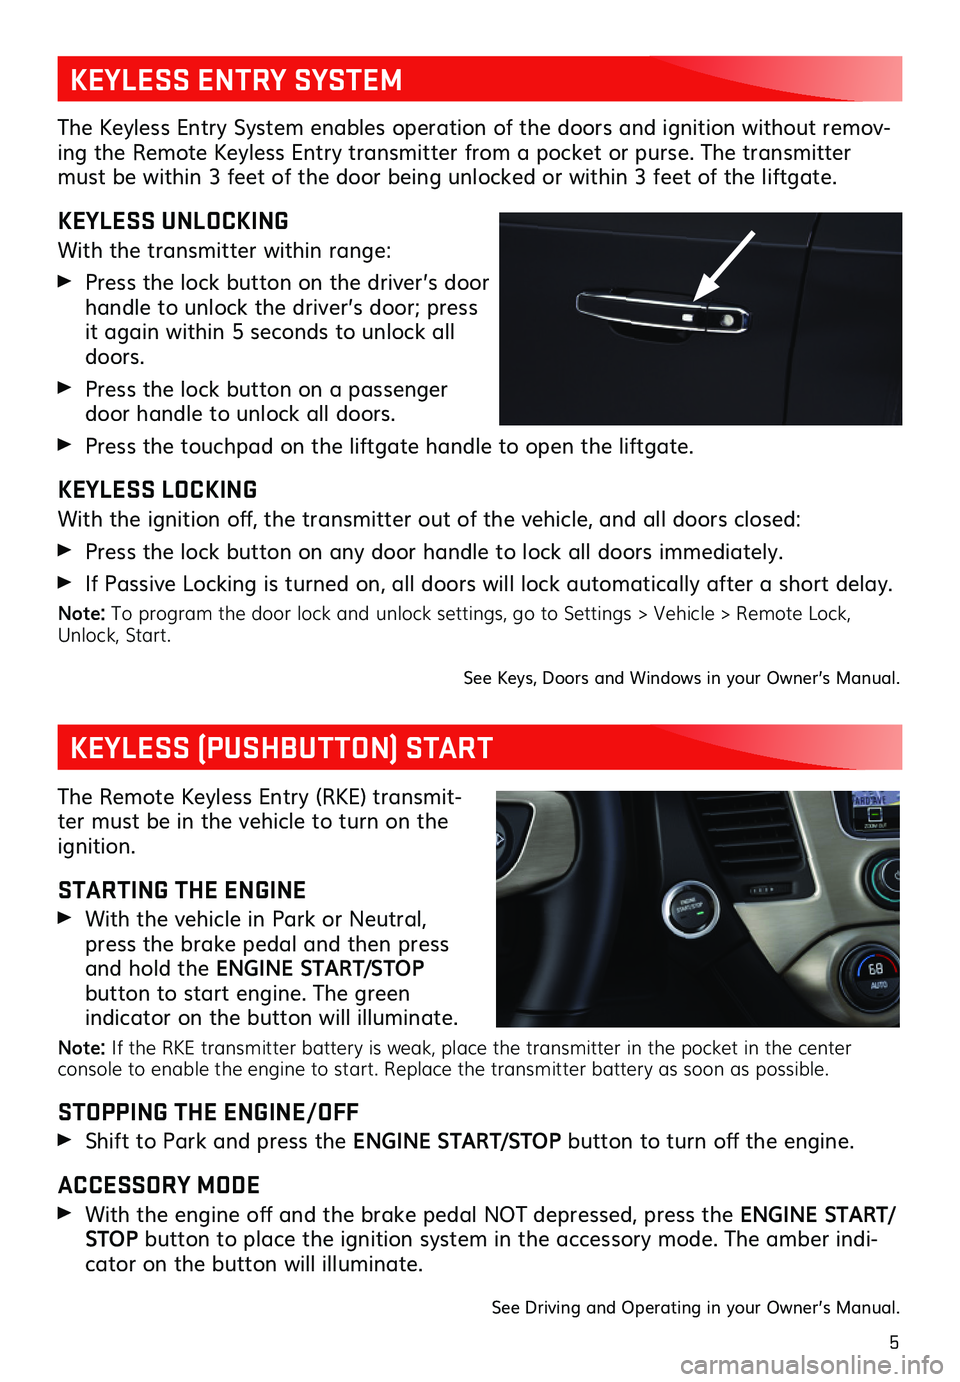 GMC YUKON 2019  Get To Know Guide 5
The Keyless Entry System enables operation of the doors and ignition without remov-ing the Remote Keyless Entry transmitter from a pocket or purse. The transmitter must be within 3 feet of the door 